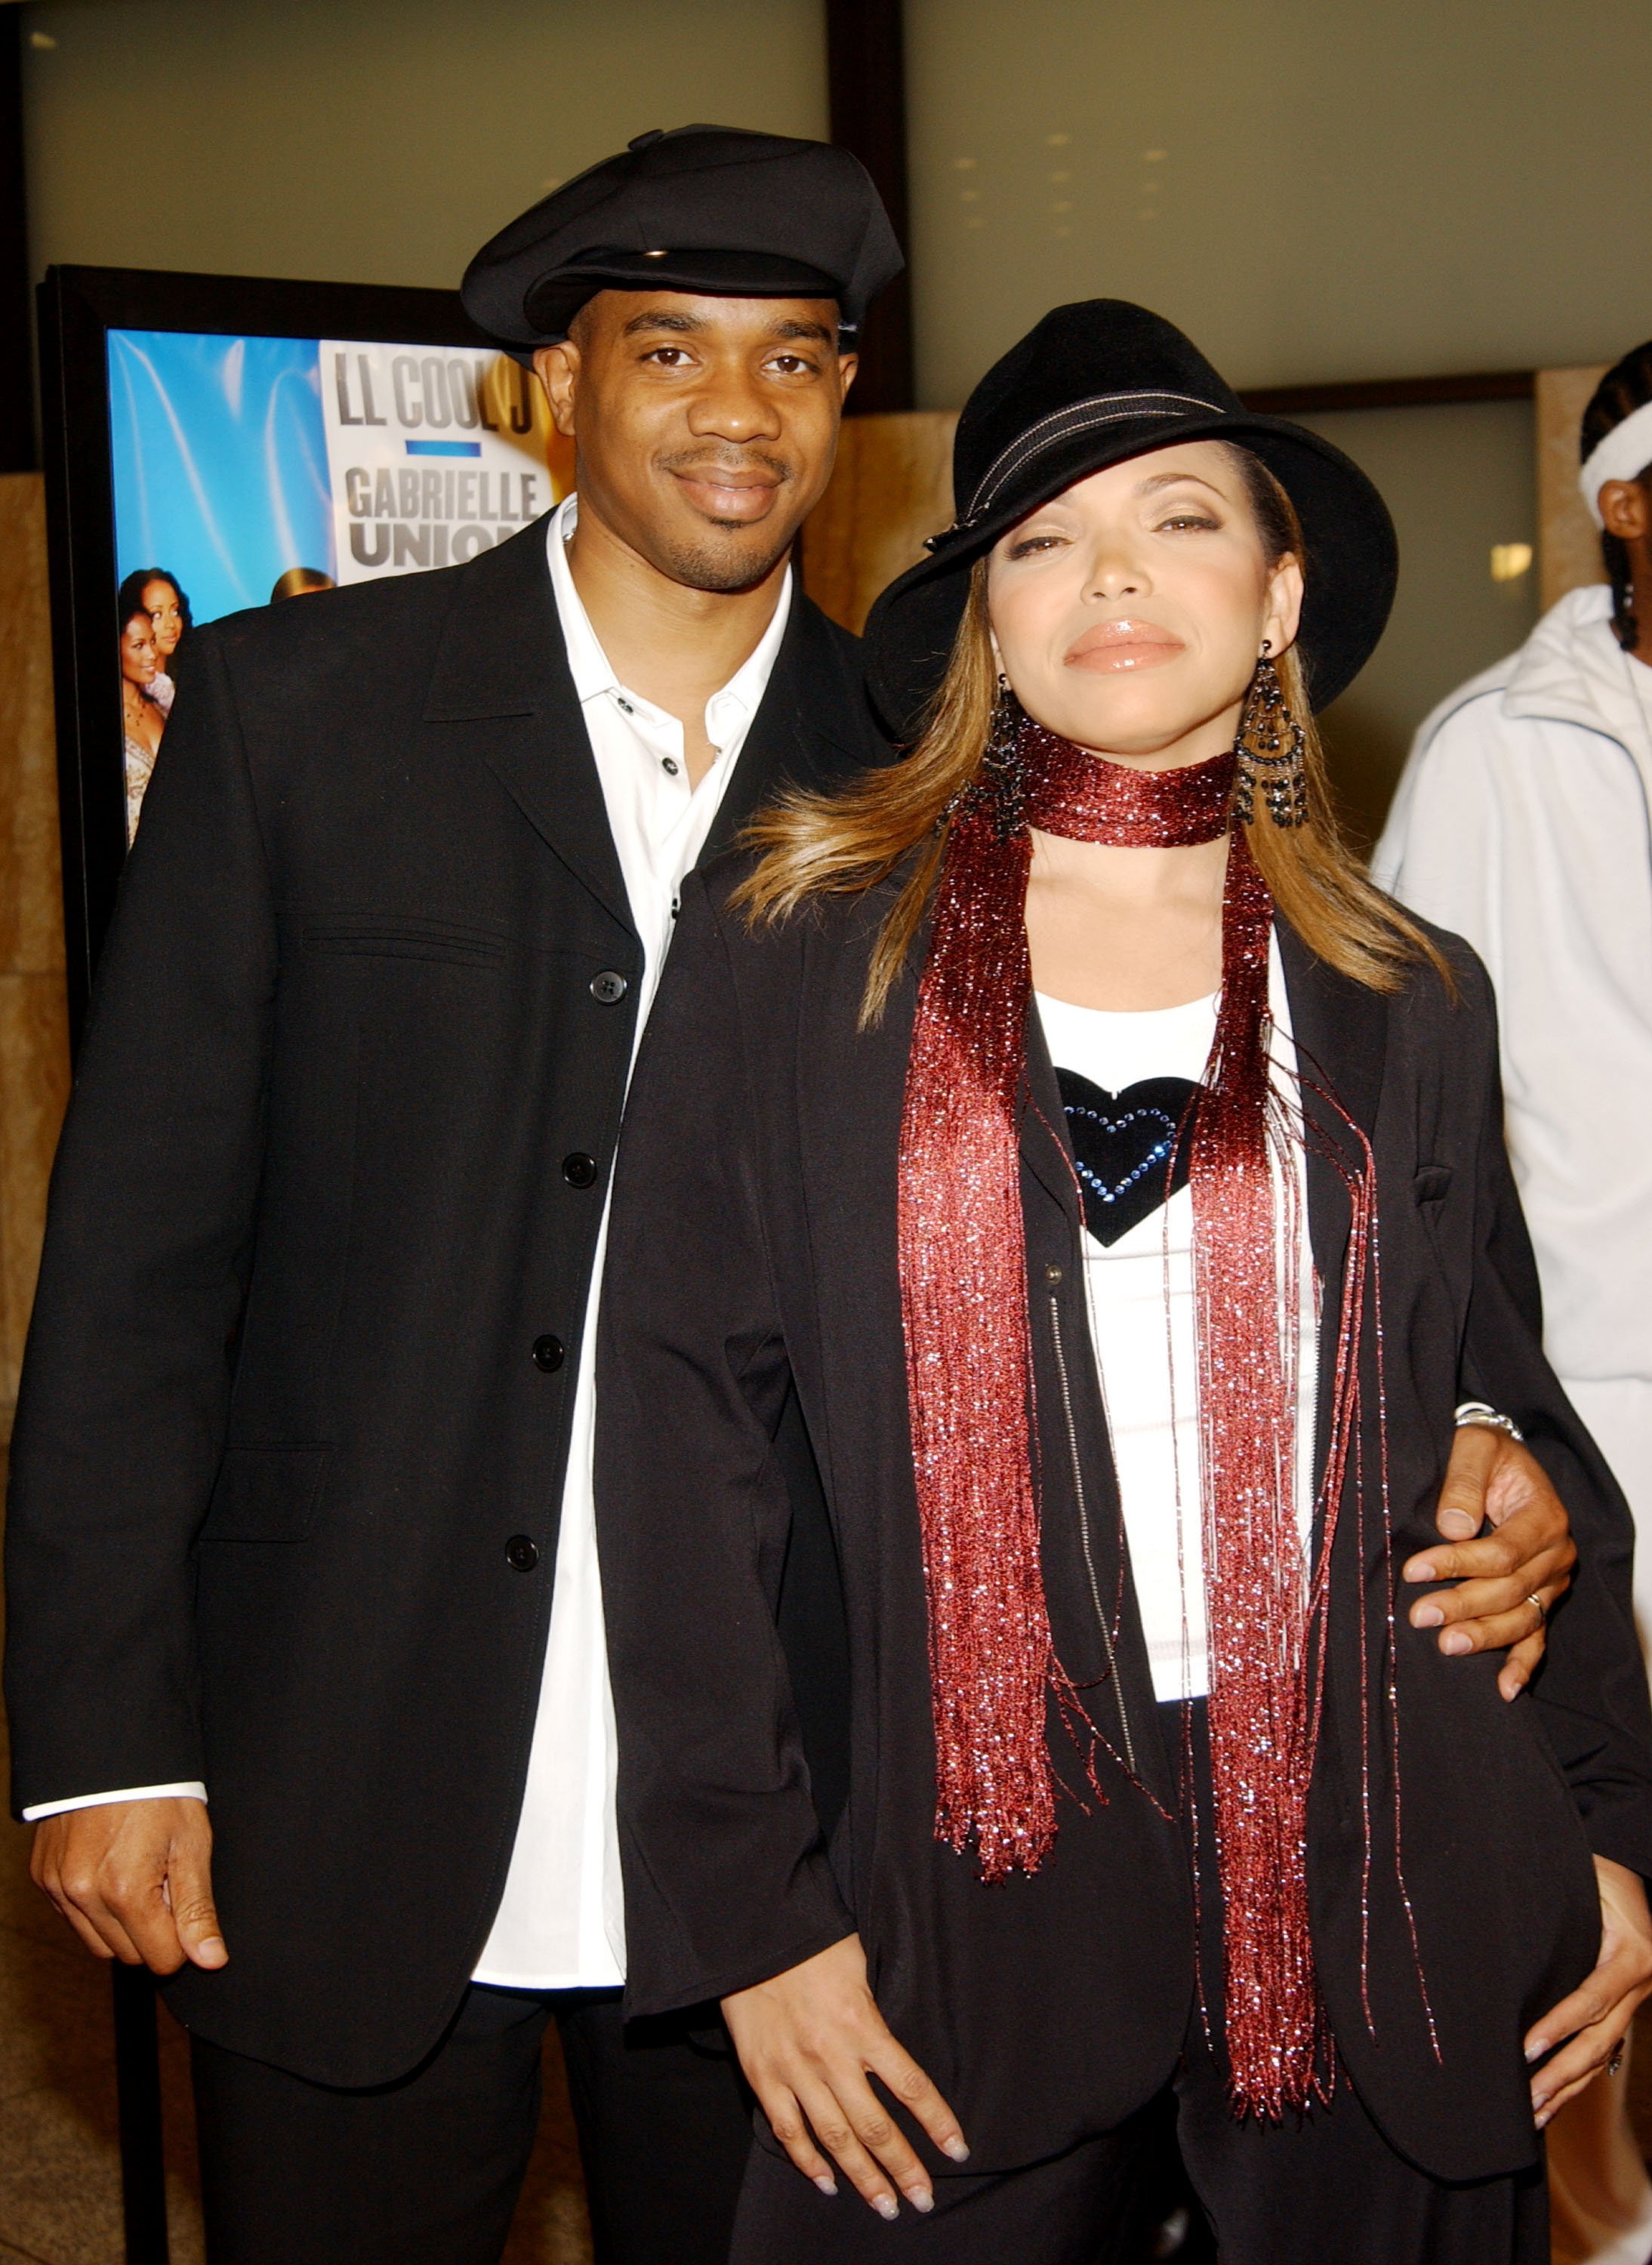 Duane Martin and Tisha Campbell Martin at the premiere of "Deliver Us From Eva" on January 29, 2003 | Source: Getty Images